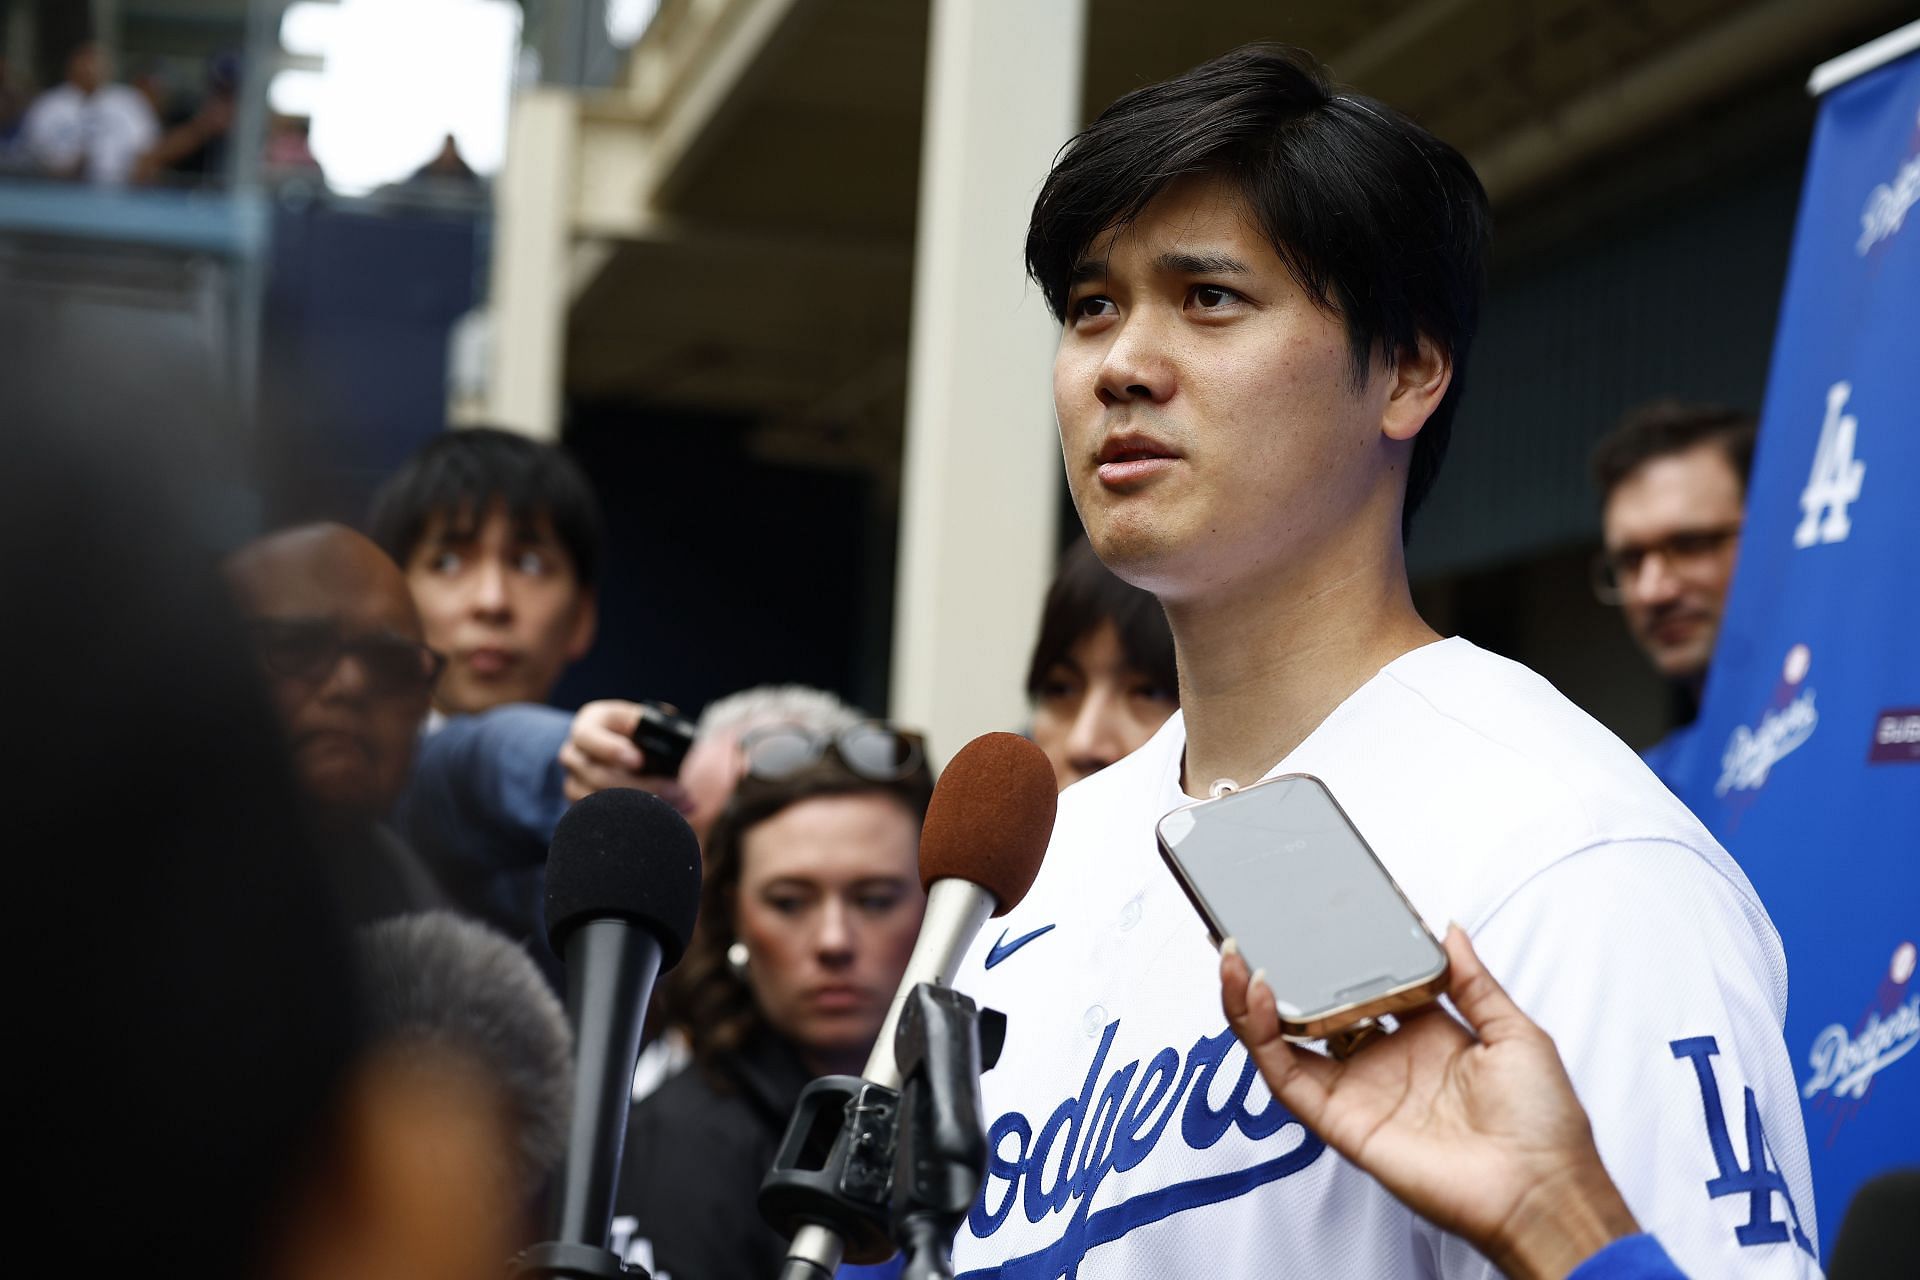 Shohei Ohtani has garnered attention from Japanese and American media during DodgerFest.